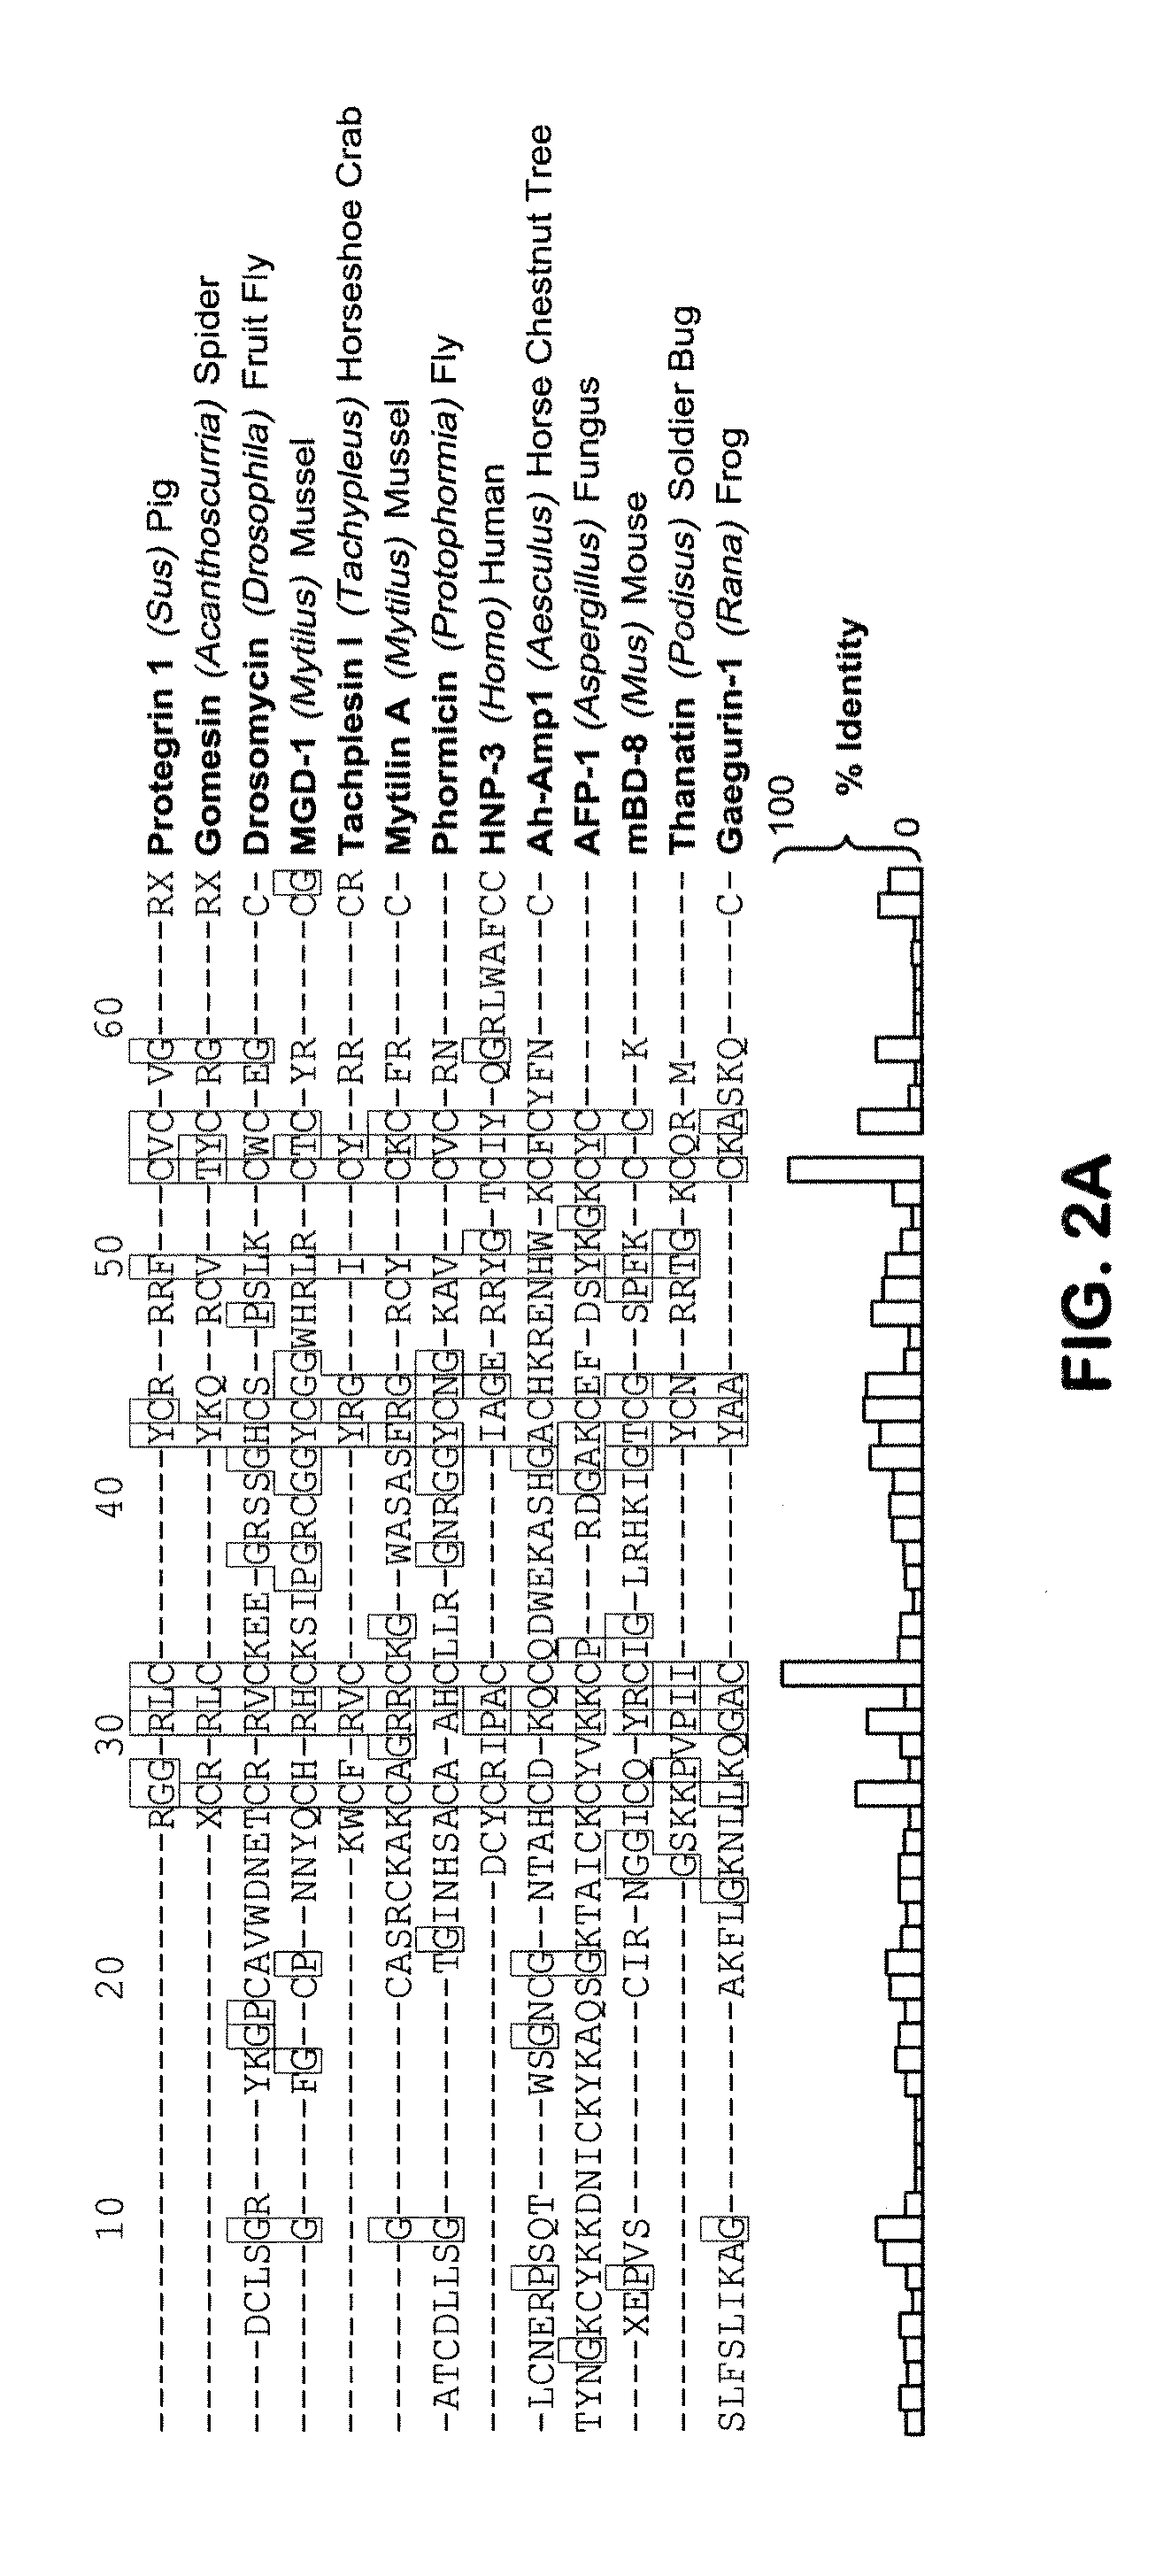 Antimicrobial kinocidin compositions and methods of use